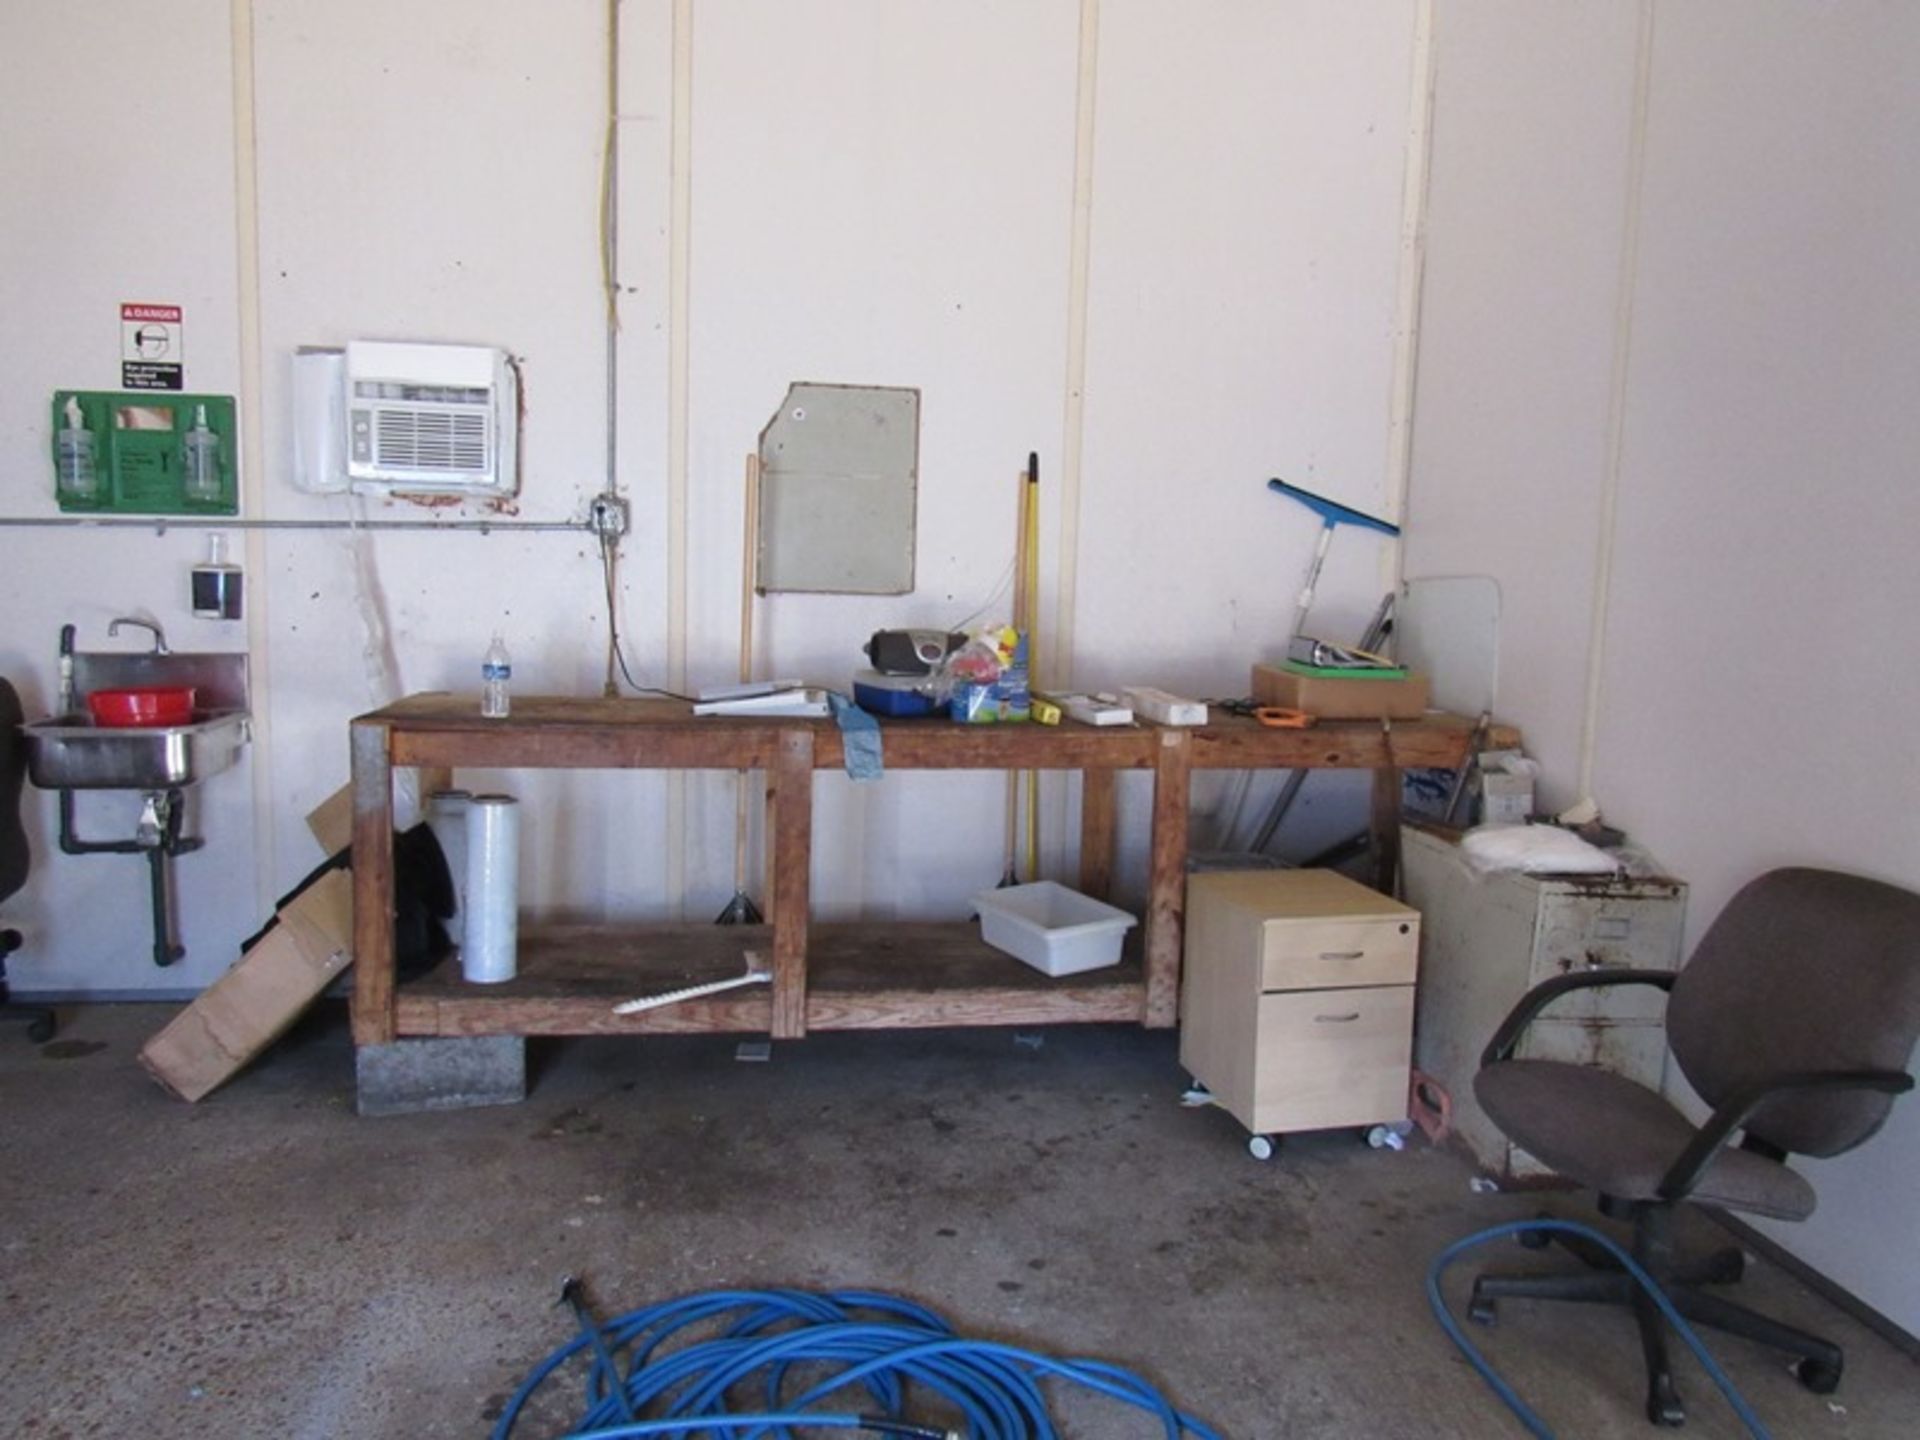 Lot Compressor Room Contents: Desk, Chairs, Hose, Sprayers, Bump Caps, Boots, Stainless Steel - Image 3 of 10